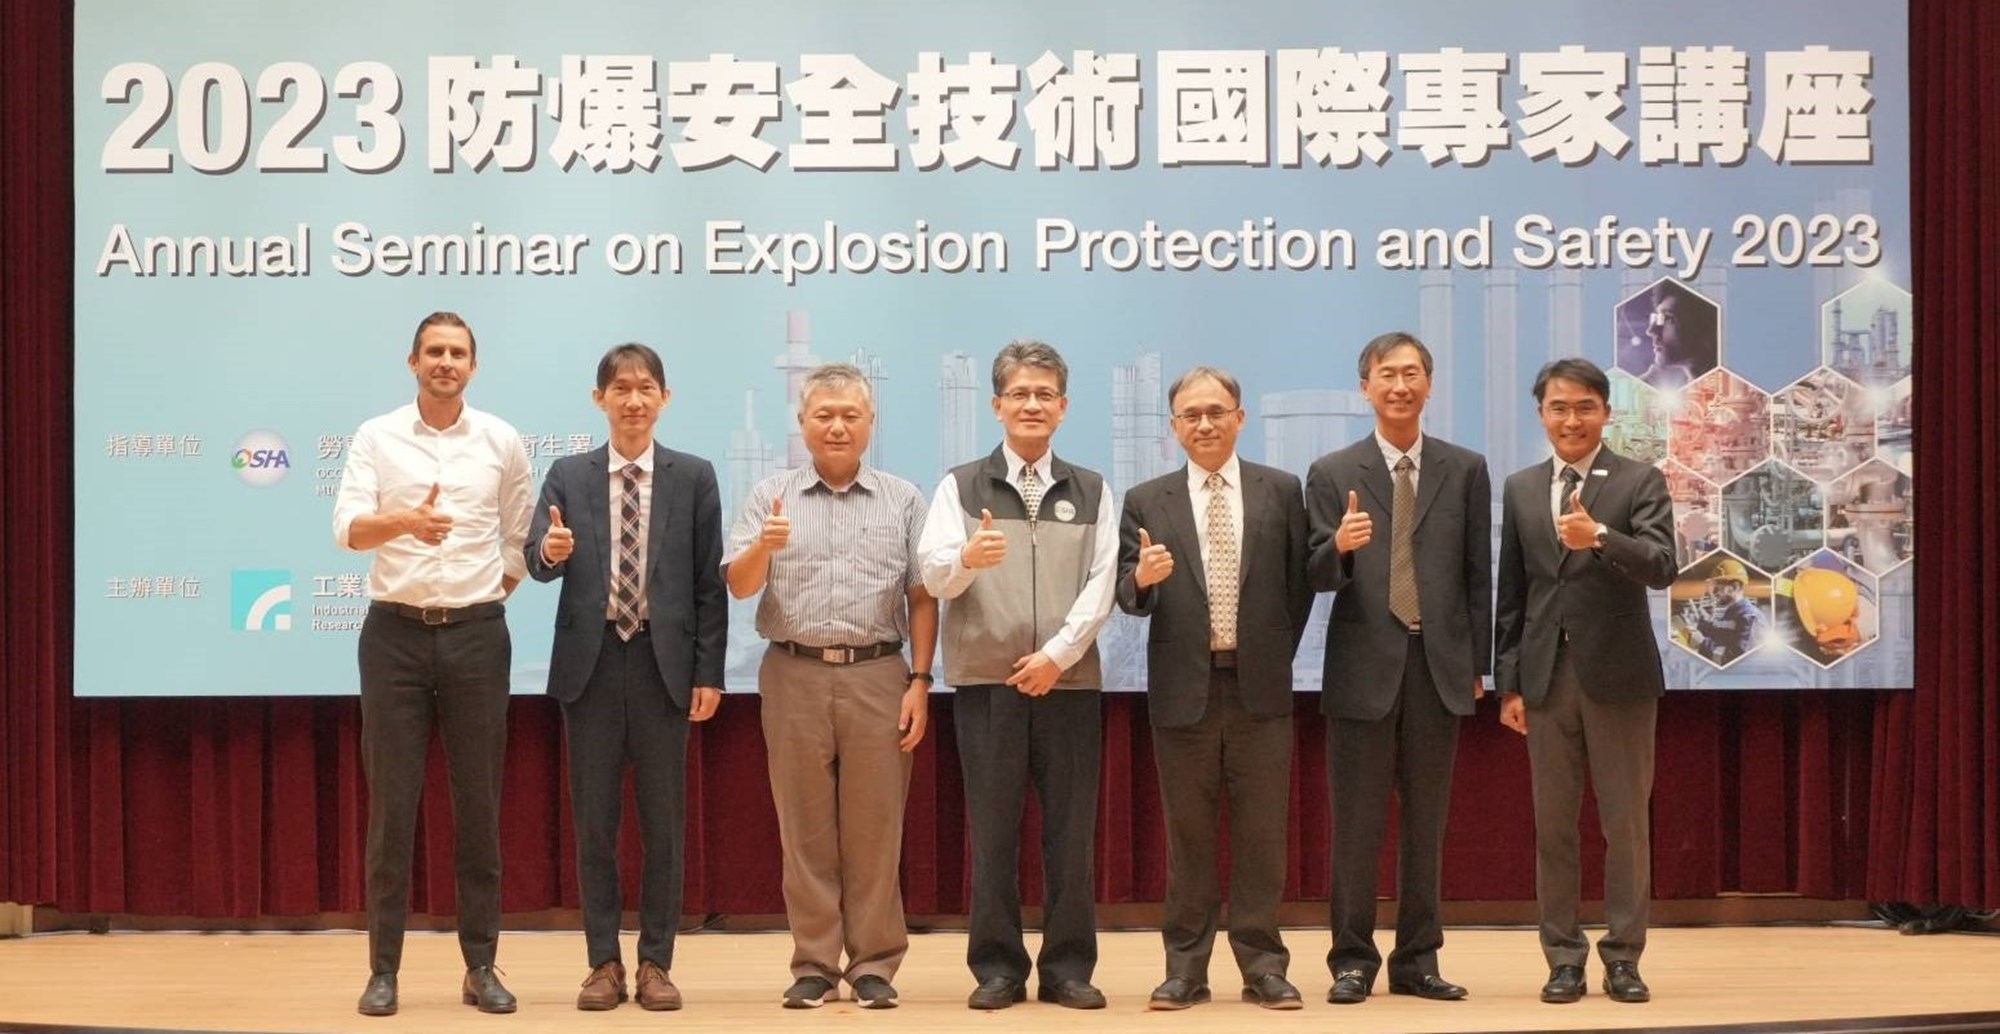 Annual Seminar on Explosion Protection and Industrial Safety 2023